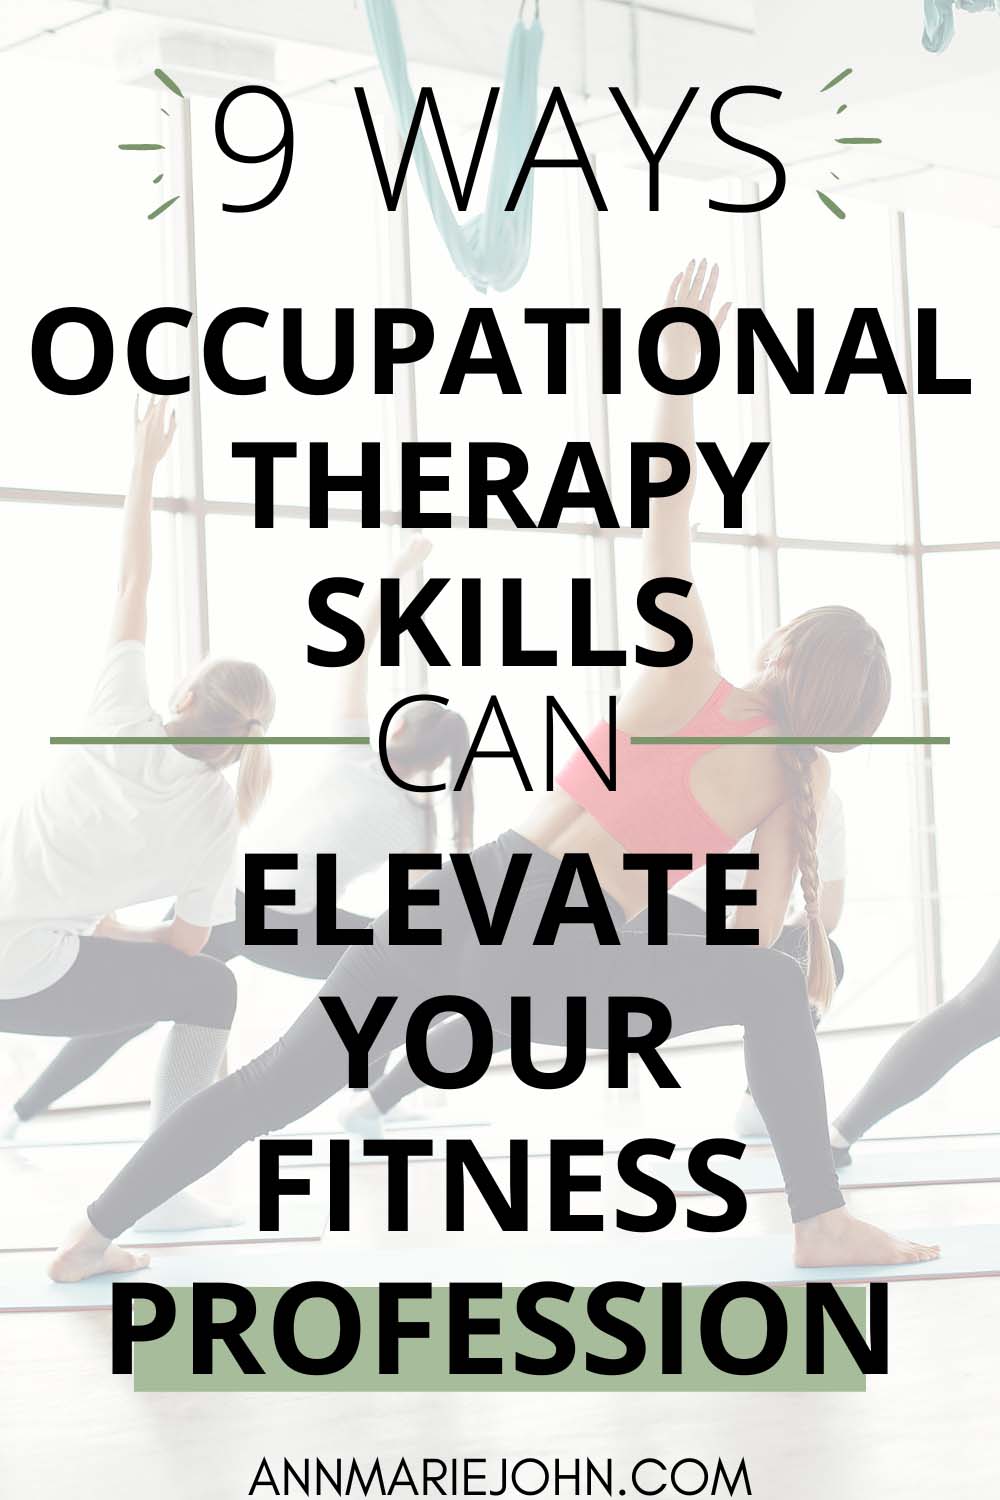 9 Ways Occupational Therapy Skills Can Elevate Your Fitness Profession